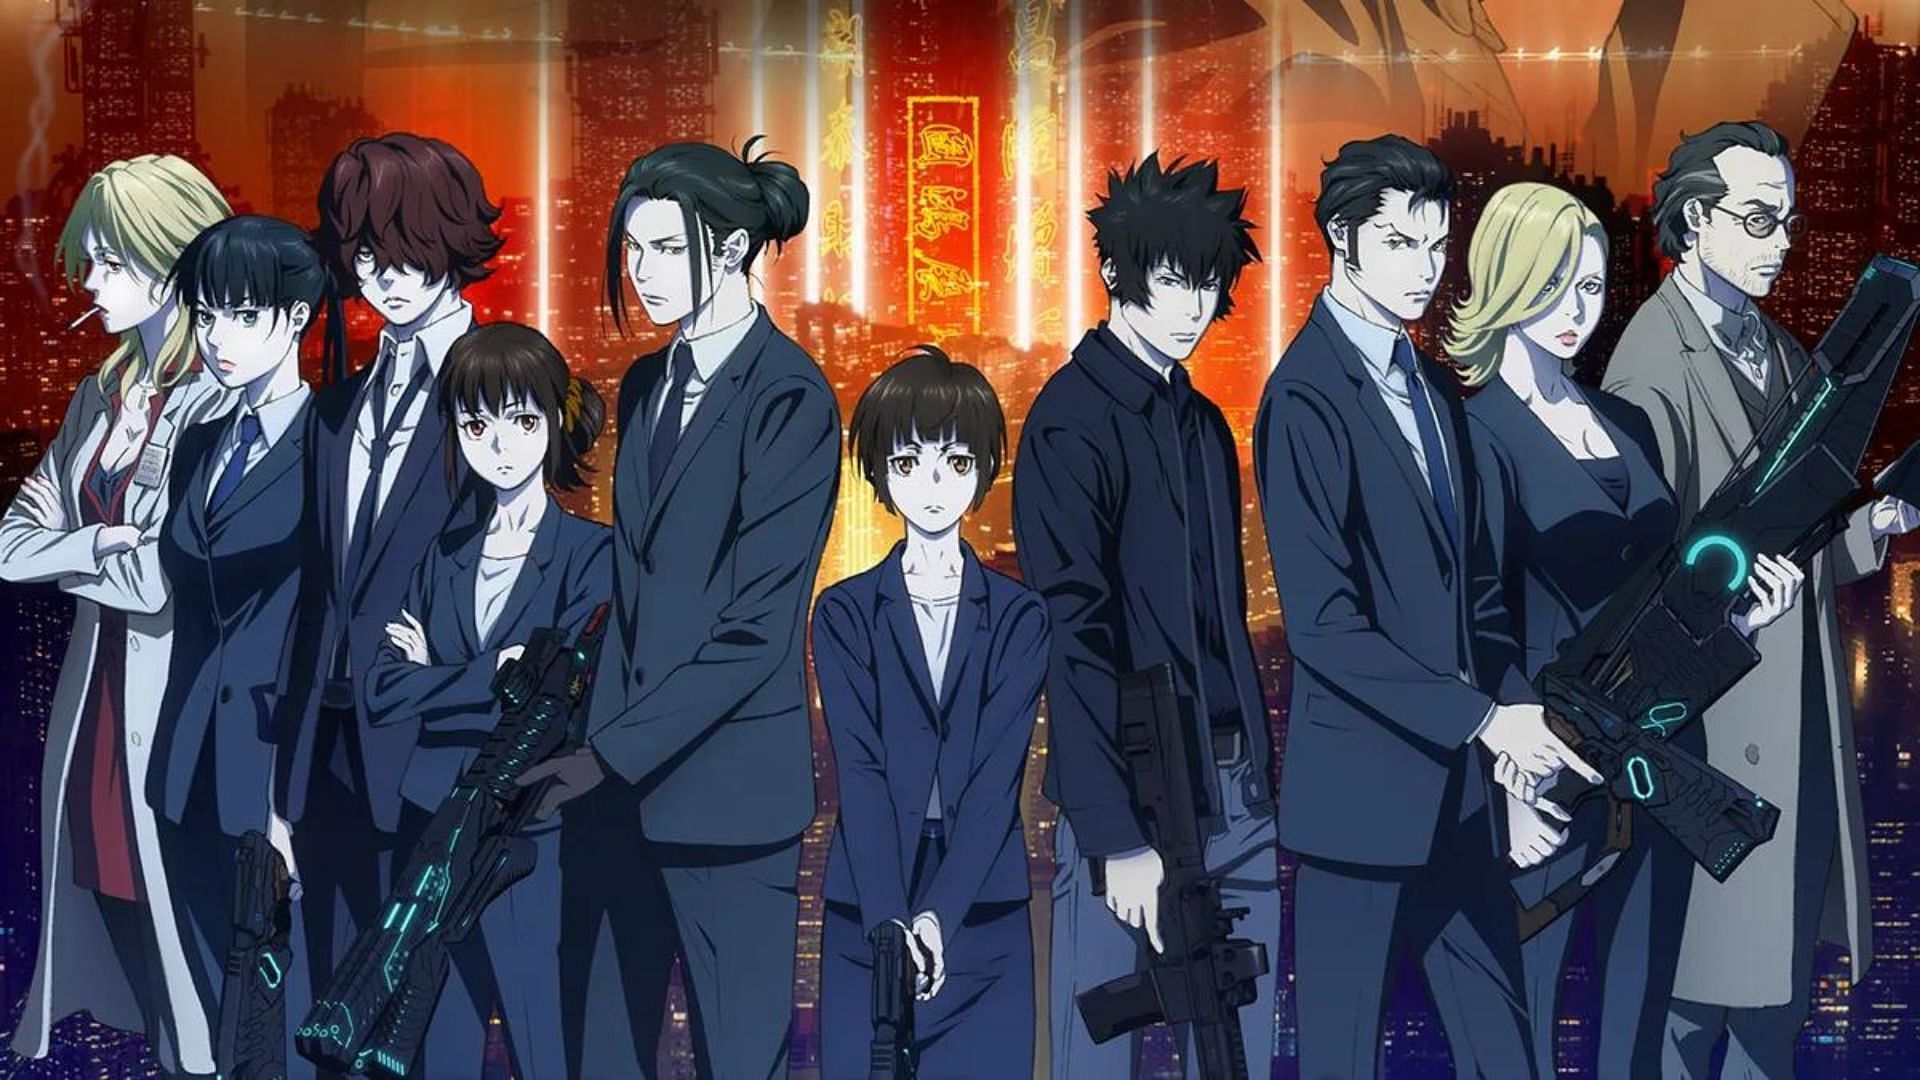 HD psycho pass anime wallpapers | Peakpx